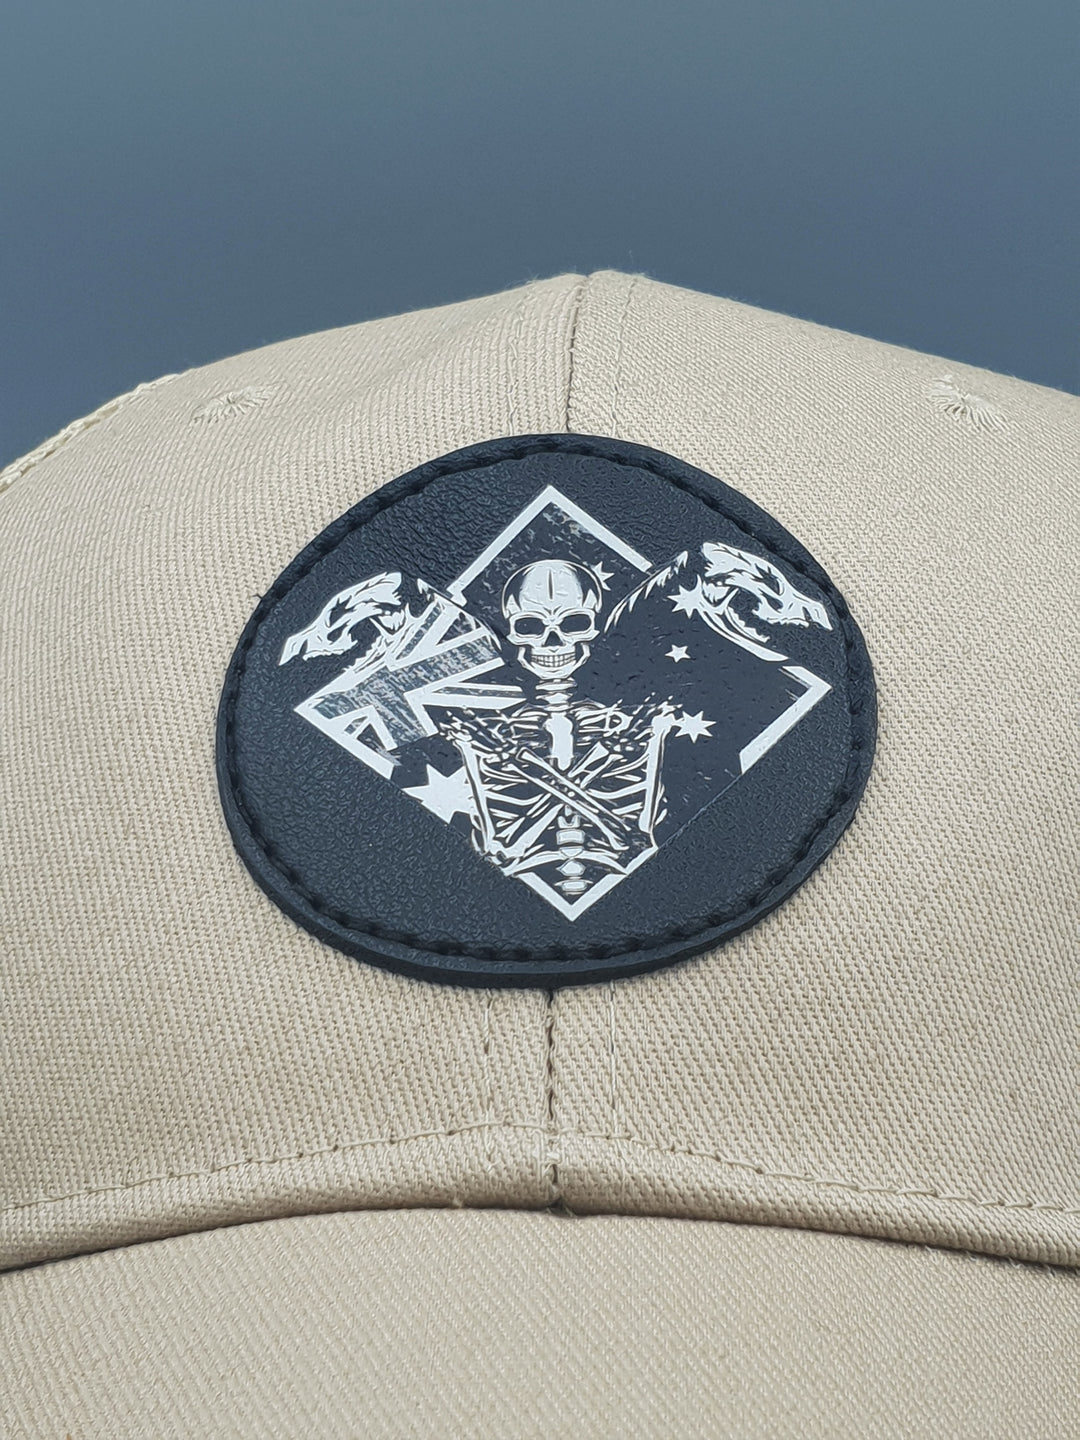 Truckers hat After Life logo